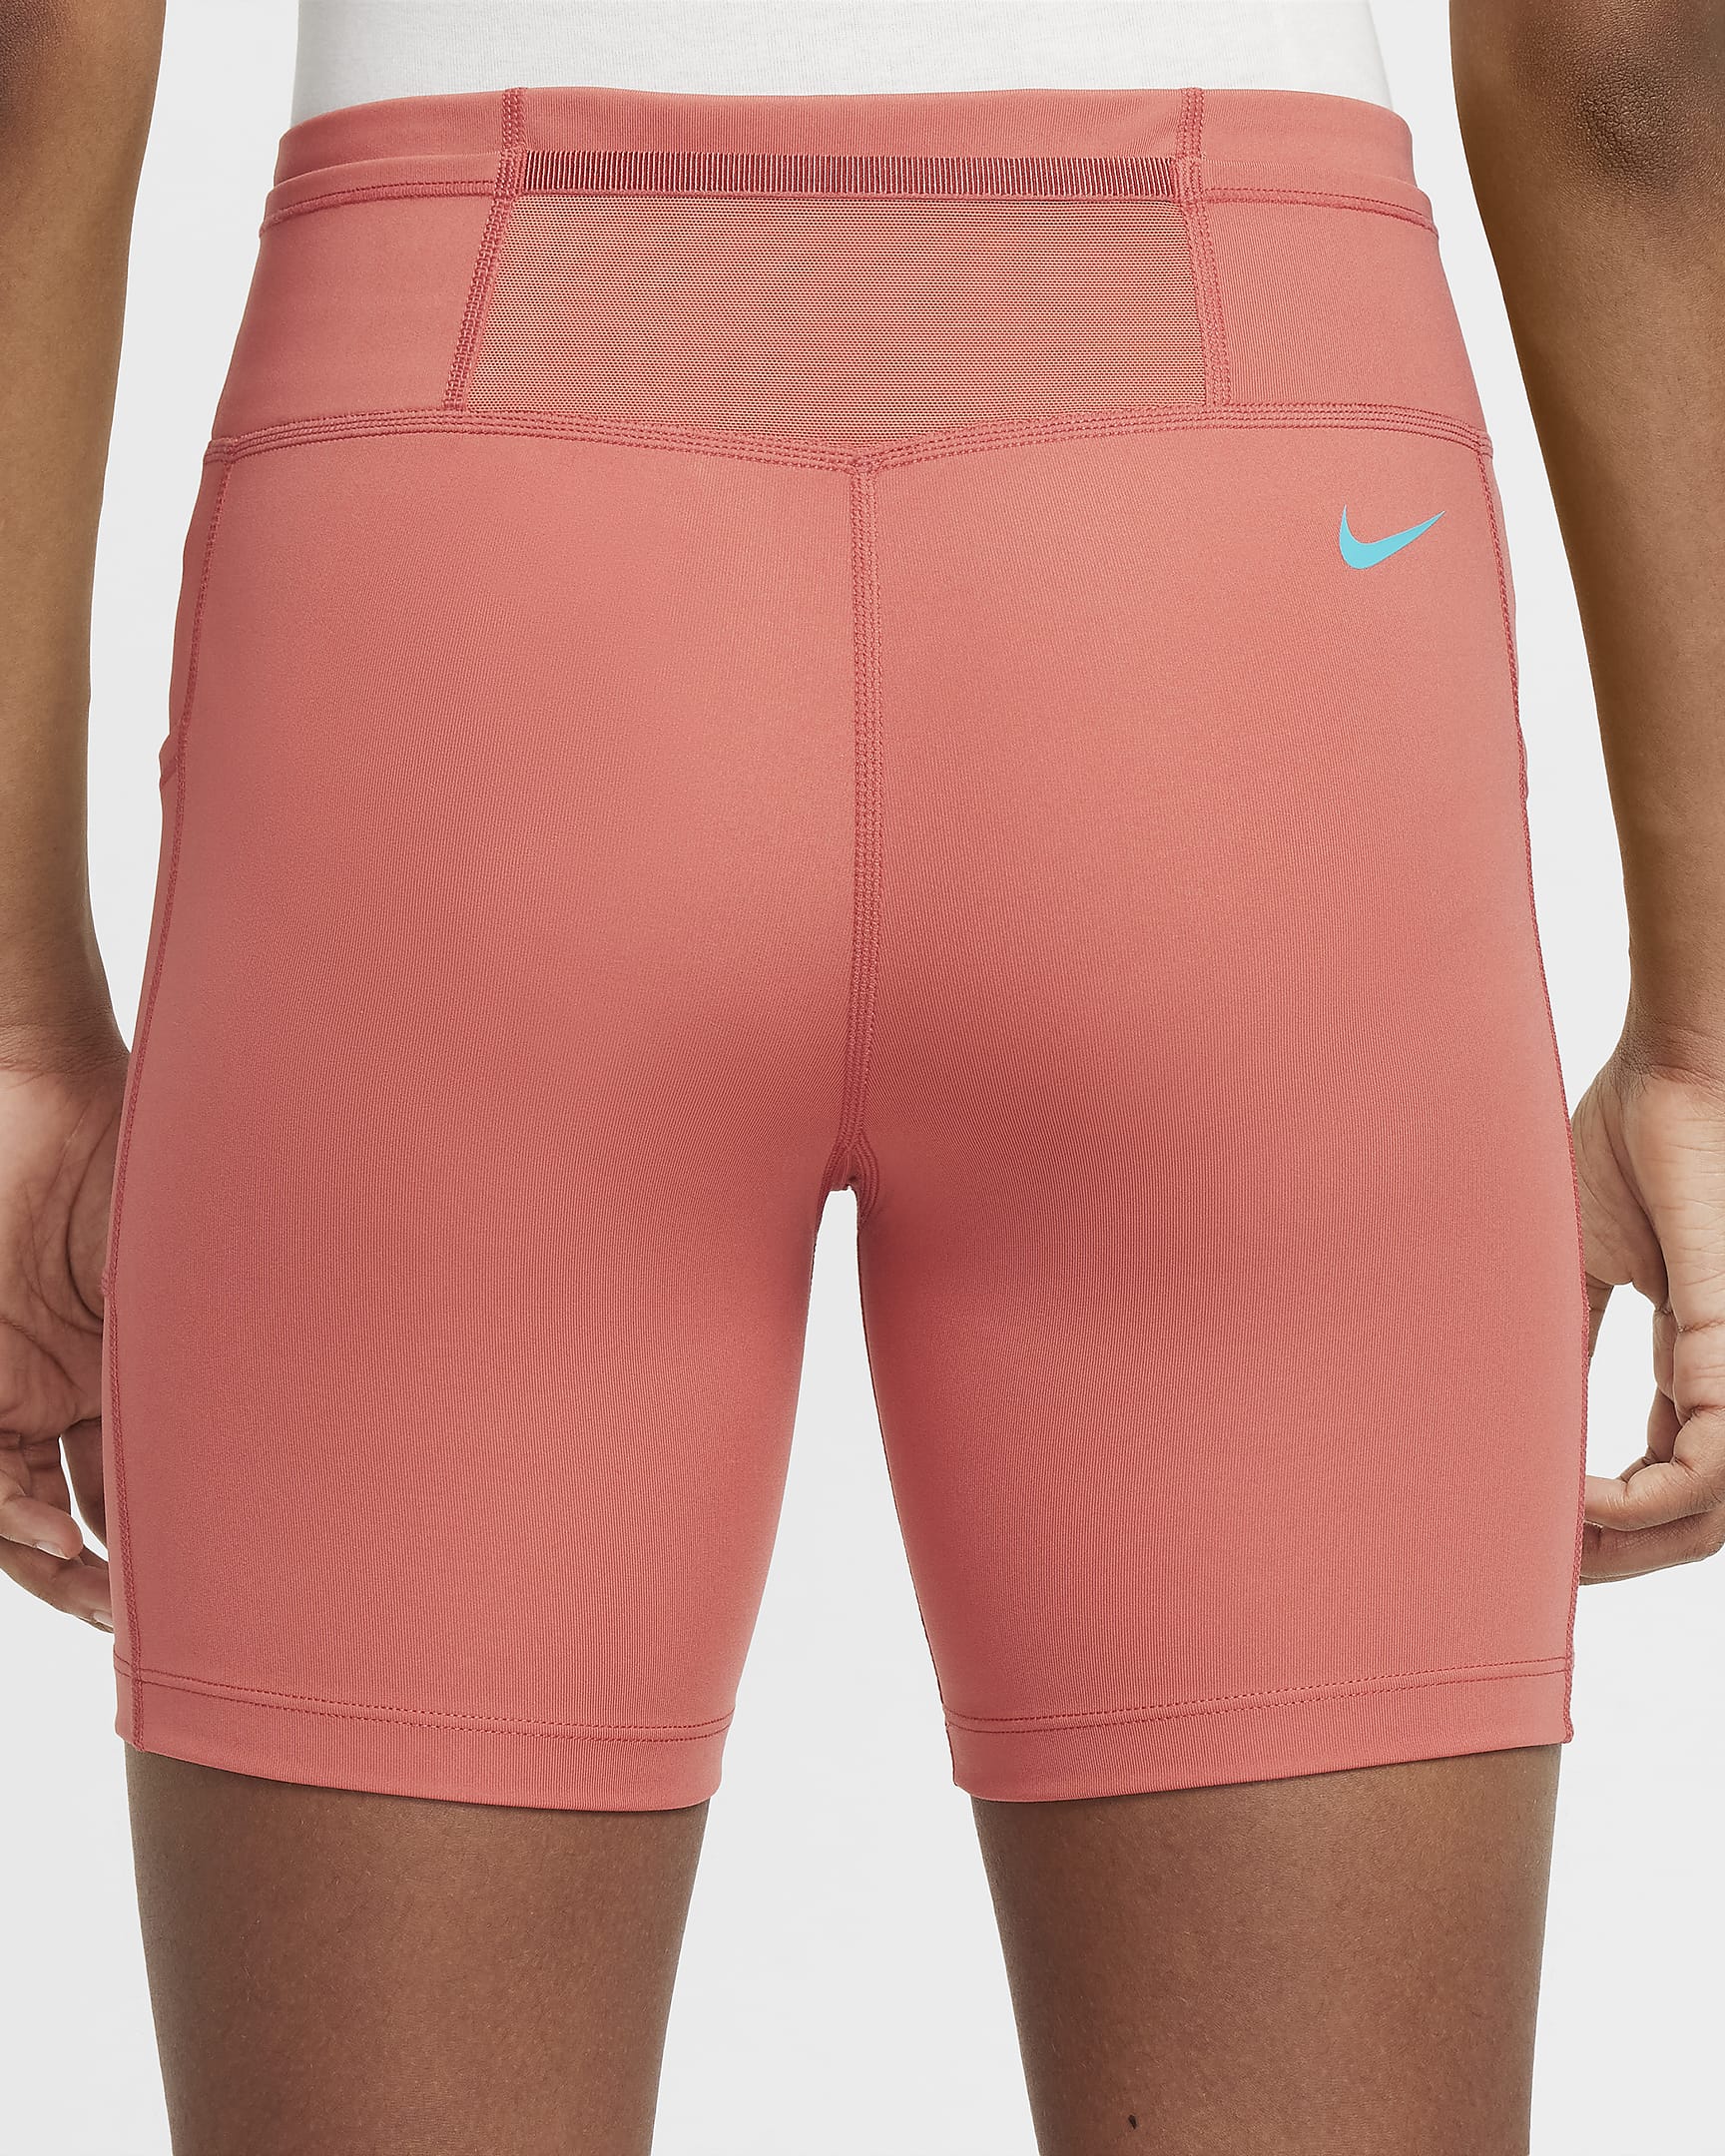 Nike ACG Repel One Older Kids' (Girls') Biker Shorts with Pockets - Adobe/Dusty Cactus